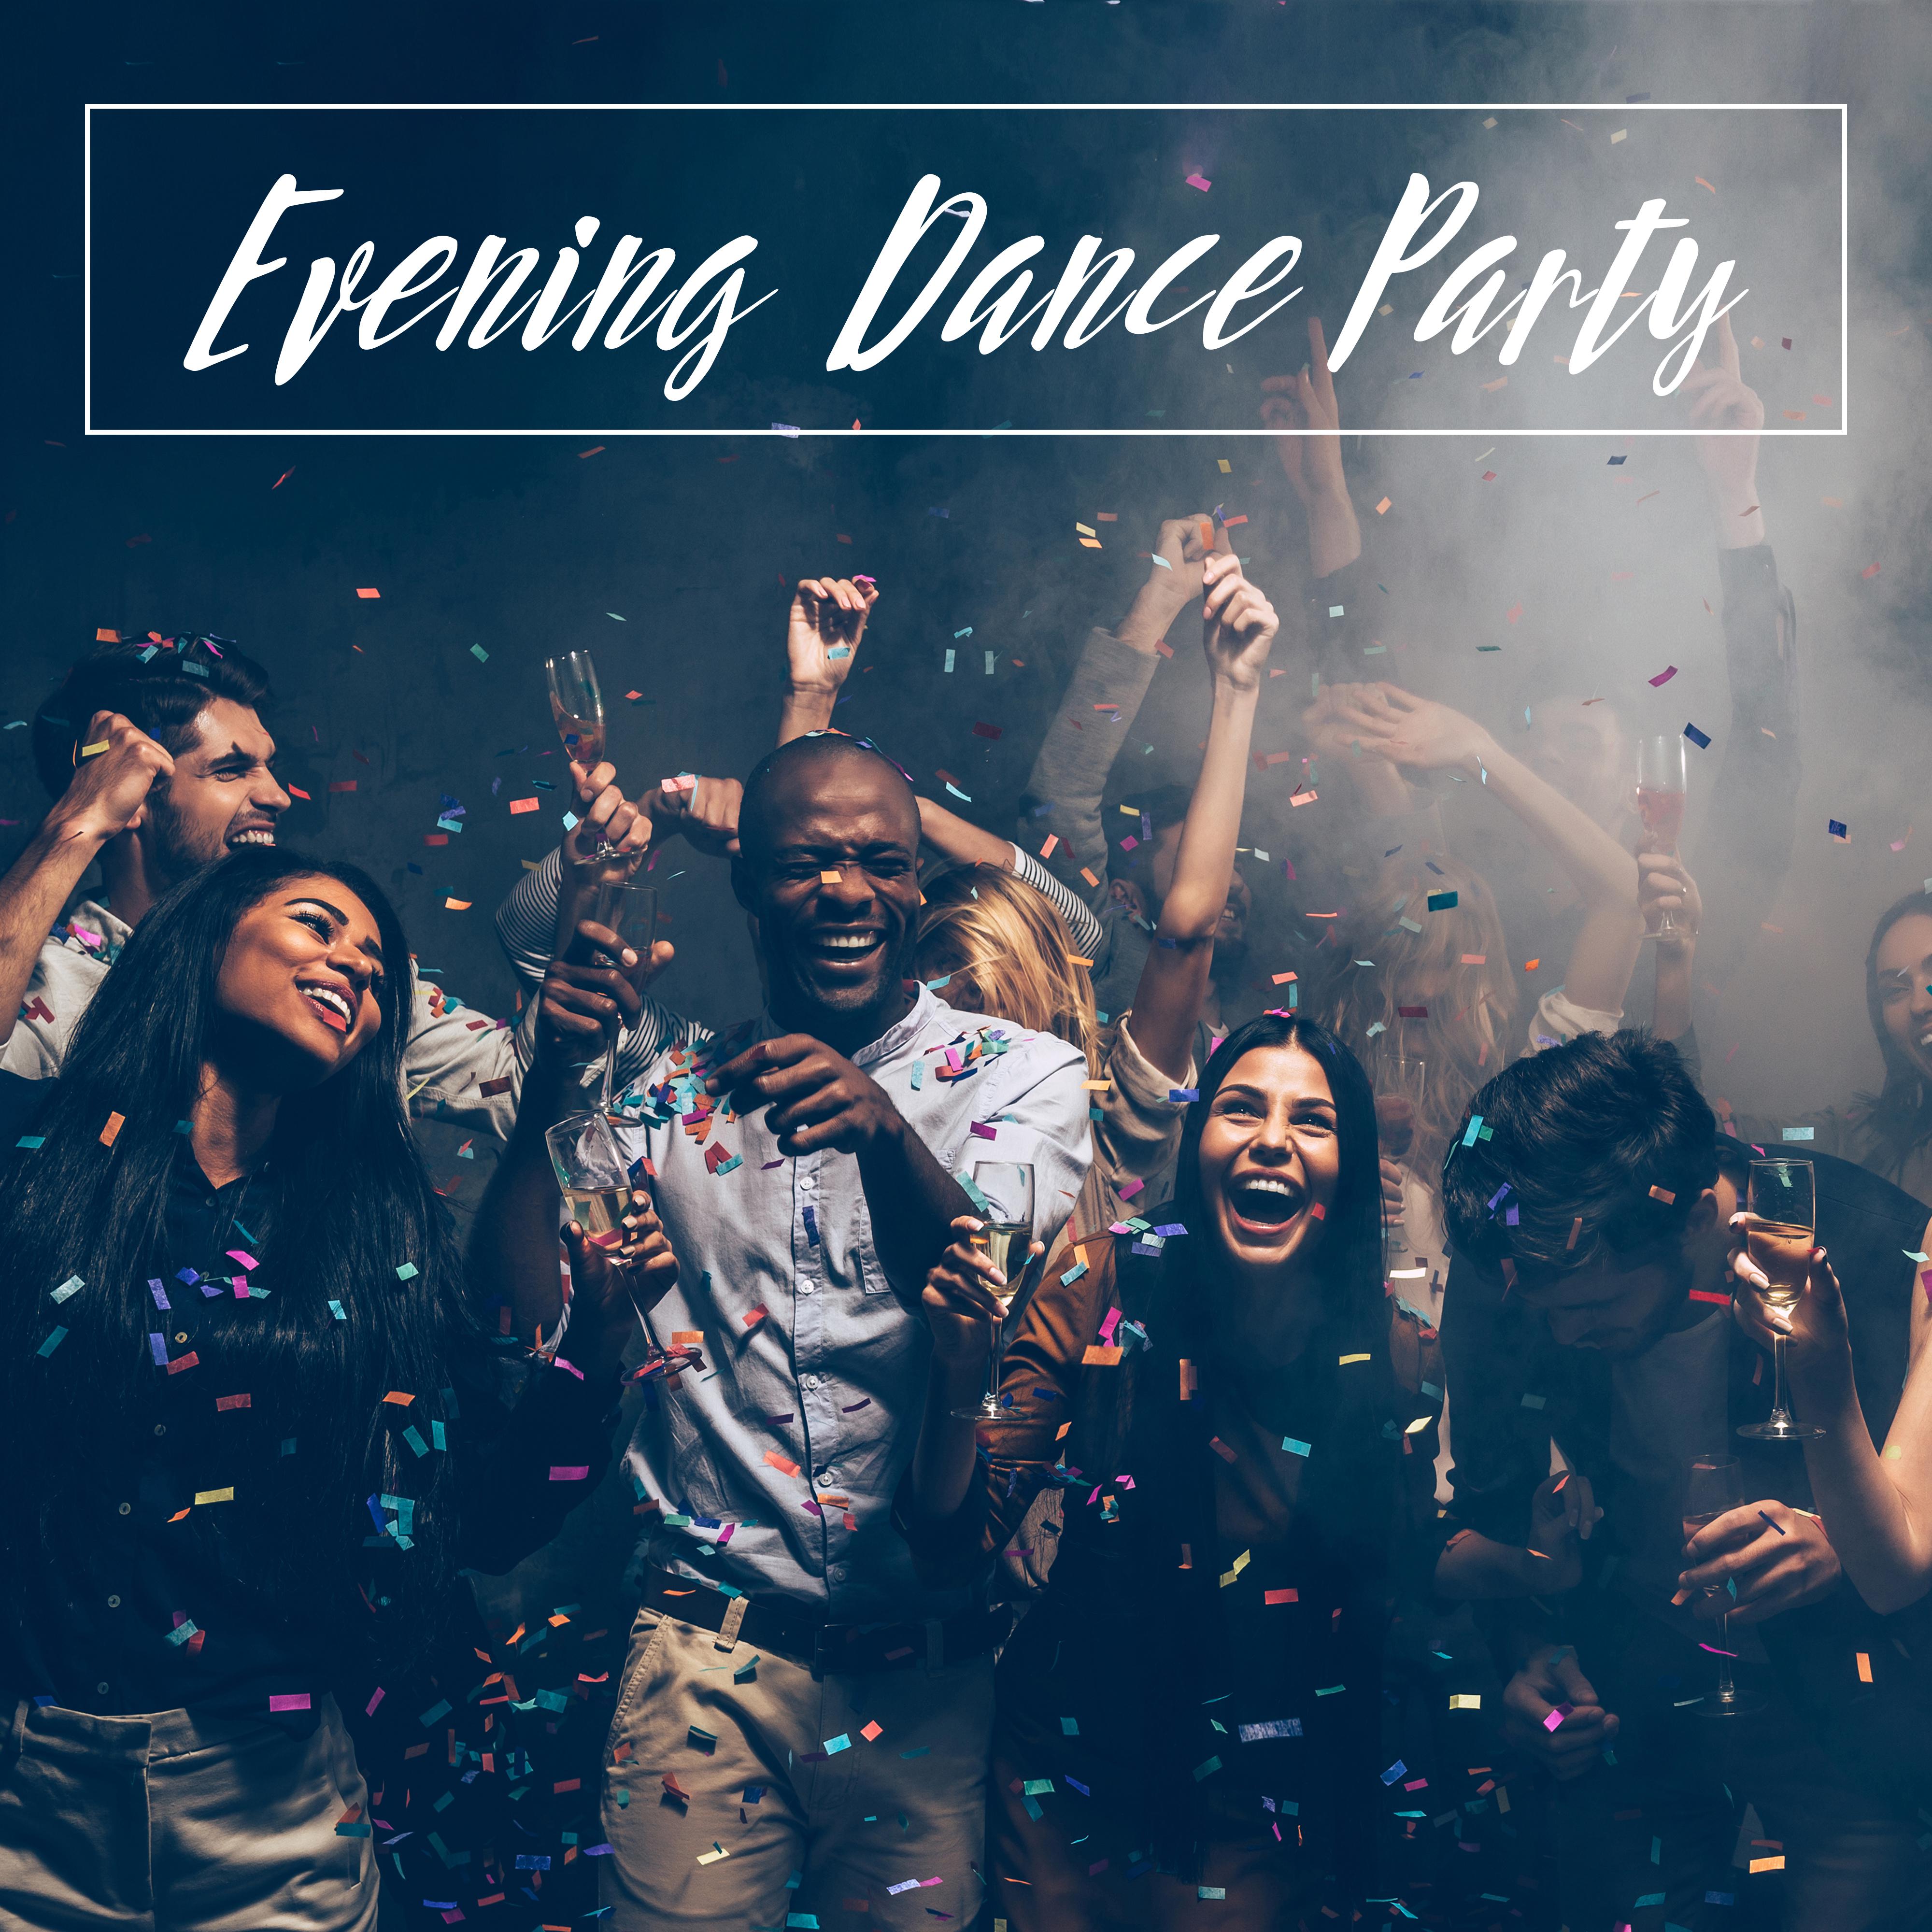 Evening Dance Party: Jazz Music to Party, Have Fun, Romantic Evening for Two and Lively Dance